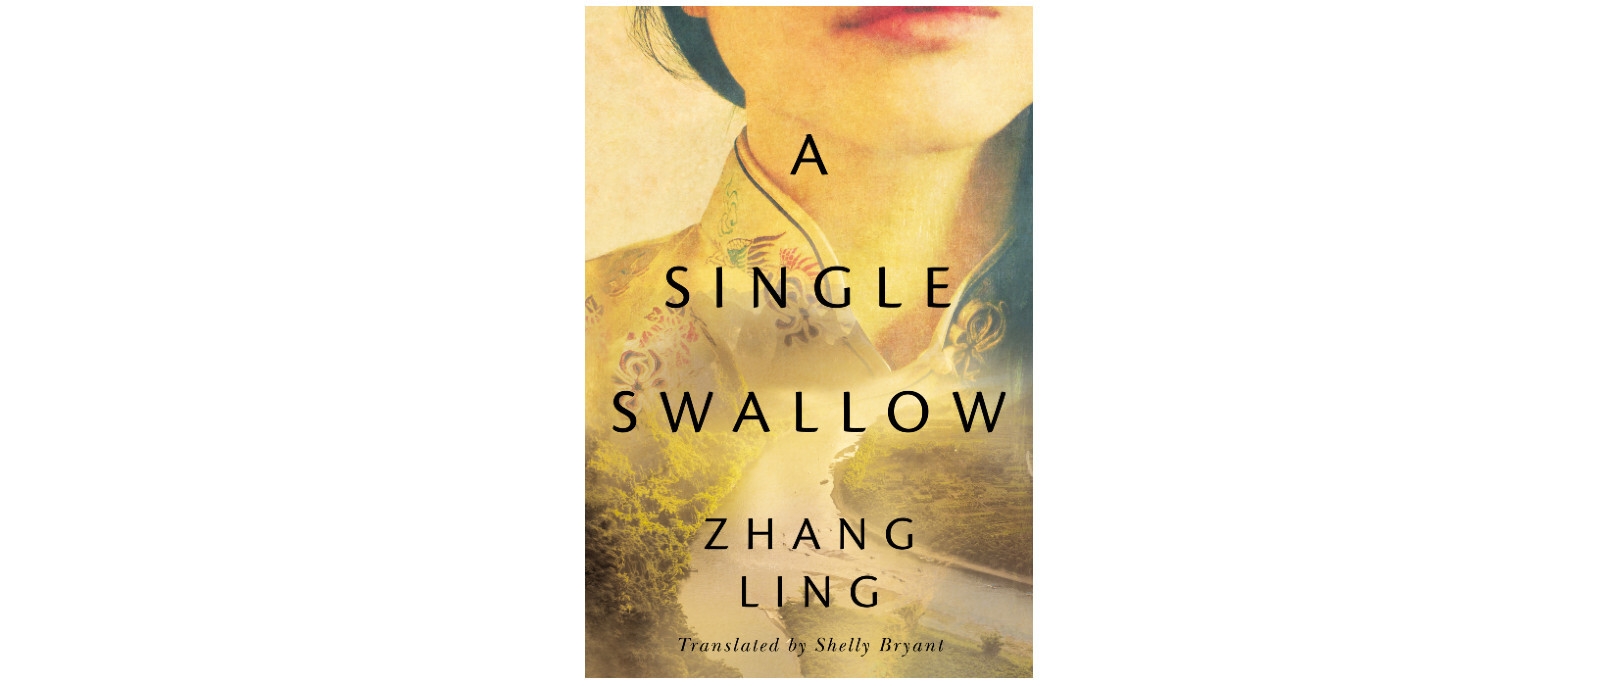 The book cover of A Single Swallow book cover by Zhang Ling. The book cover has yellow undertones and features from the top a woman's face from the mouth down. A river surrounded by greenery flows into the image of the woman.